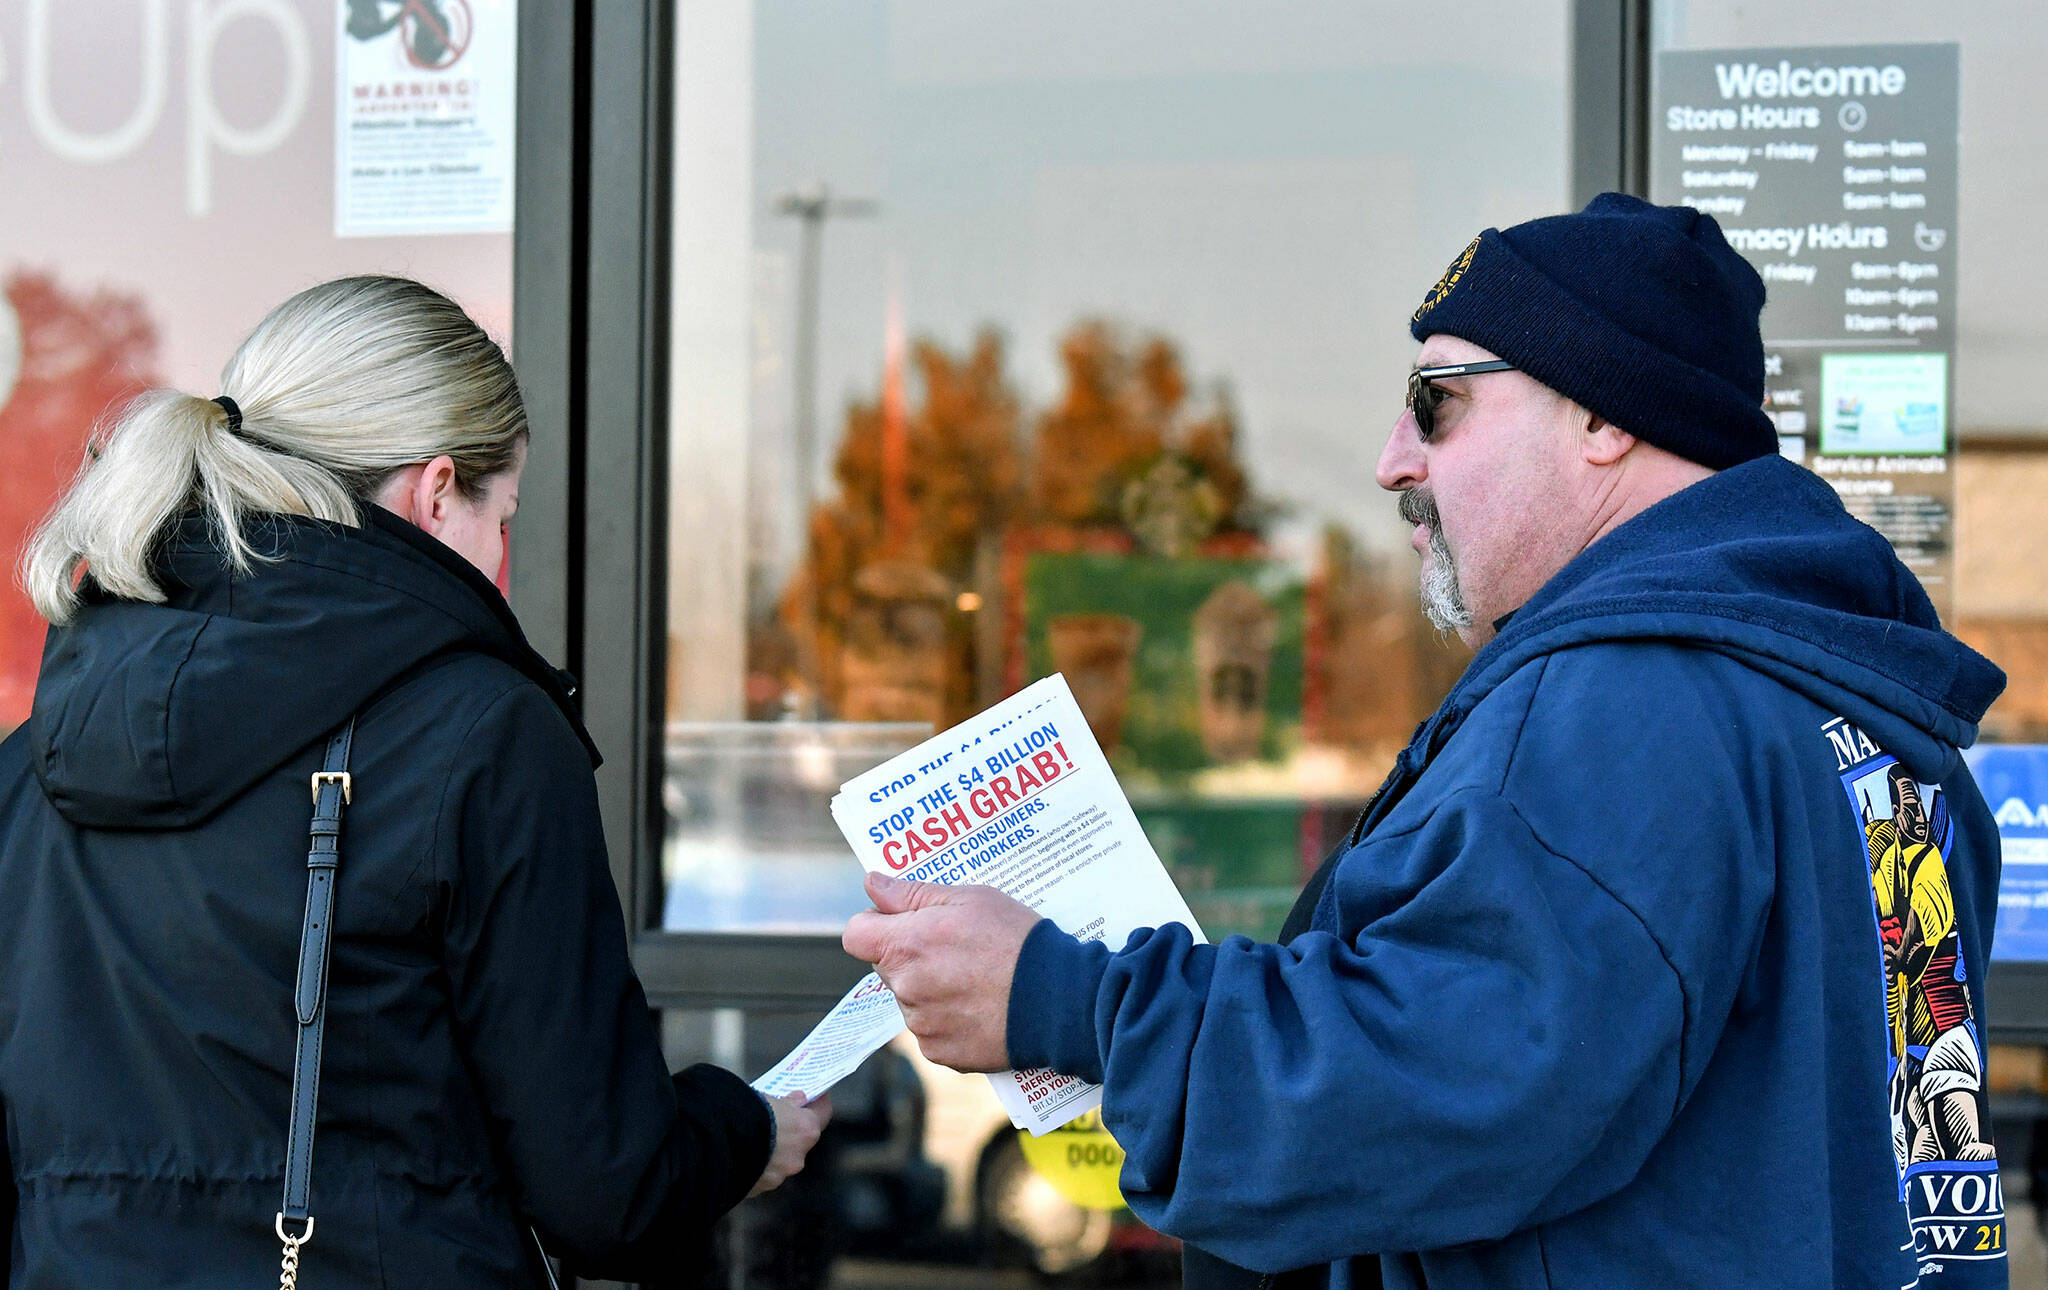 Kevin Flynn, right, a meat-cutter with the Marysville Albertsons, hands a leaflet to a shopper during an informational campaign on Wednesday. Flynn was one of less than a dozen grocery store workers handing out leaflets to shoppers about the proposed merger between Albertsons and Kroger. (Mike Henneke / The Herald)